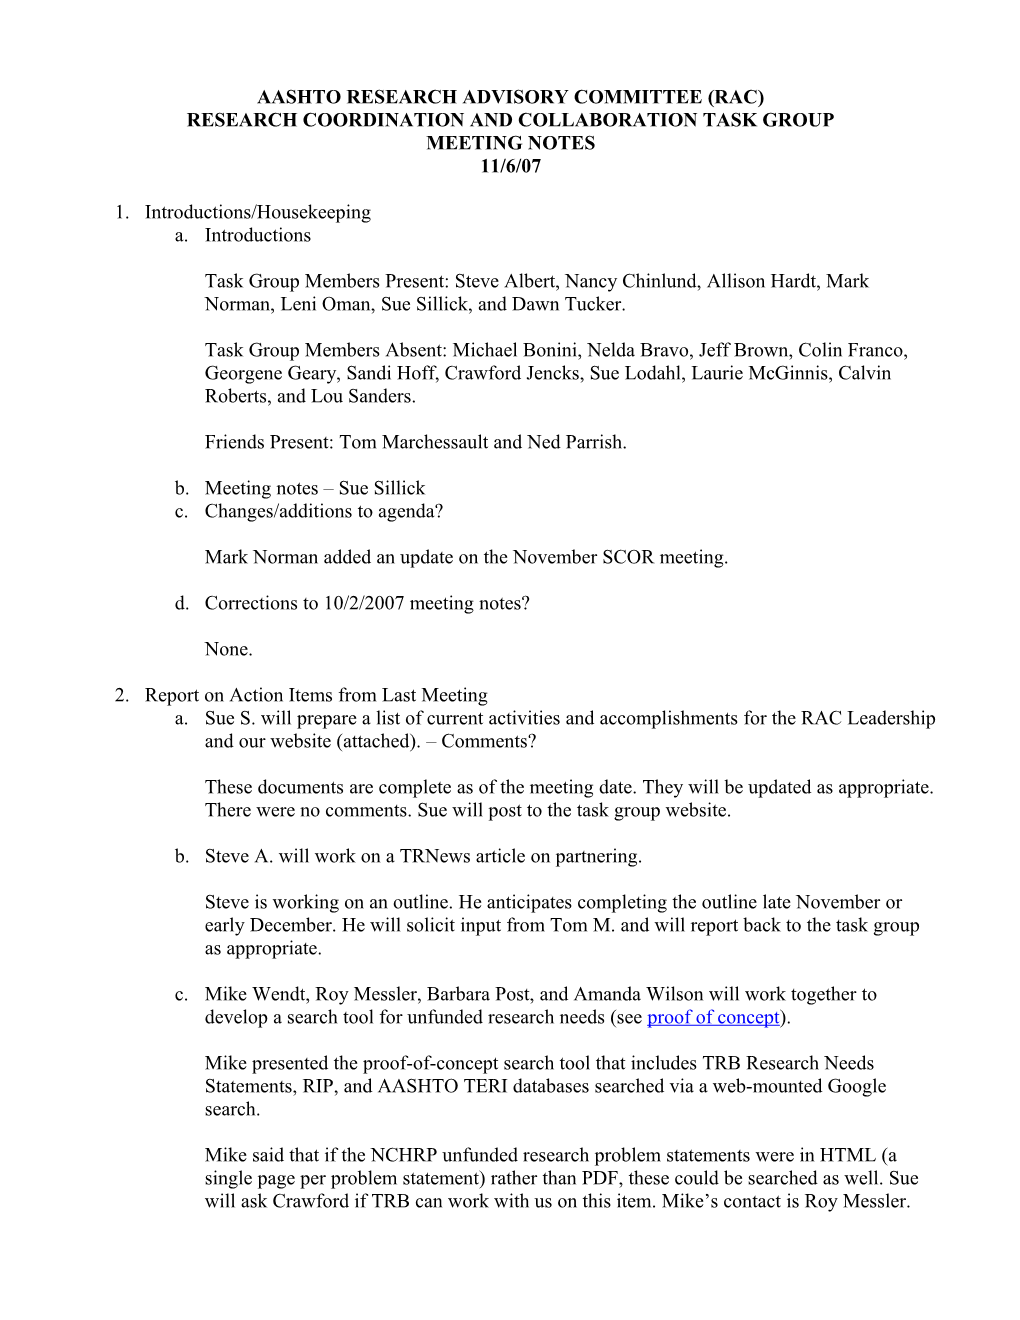 Research Coordination and Collaboration Meeting Notes: November 6, 2007